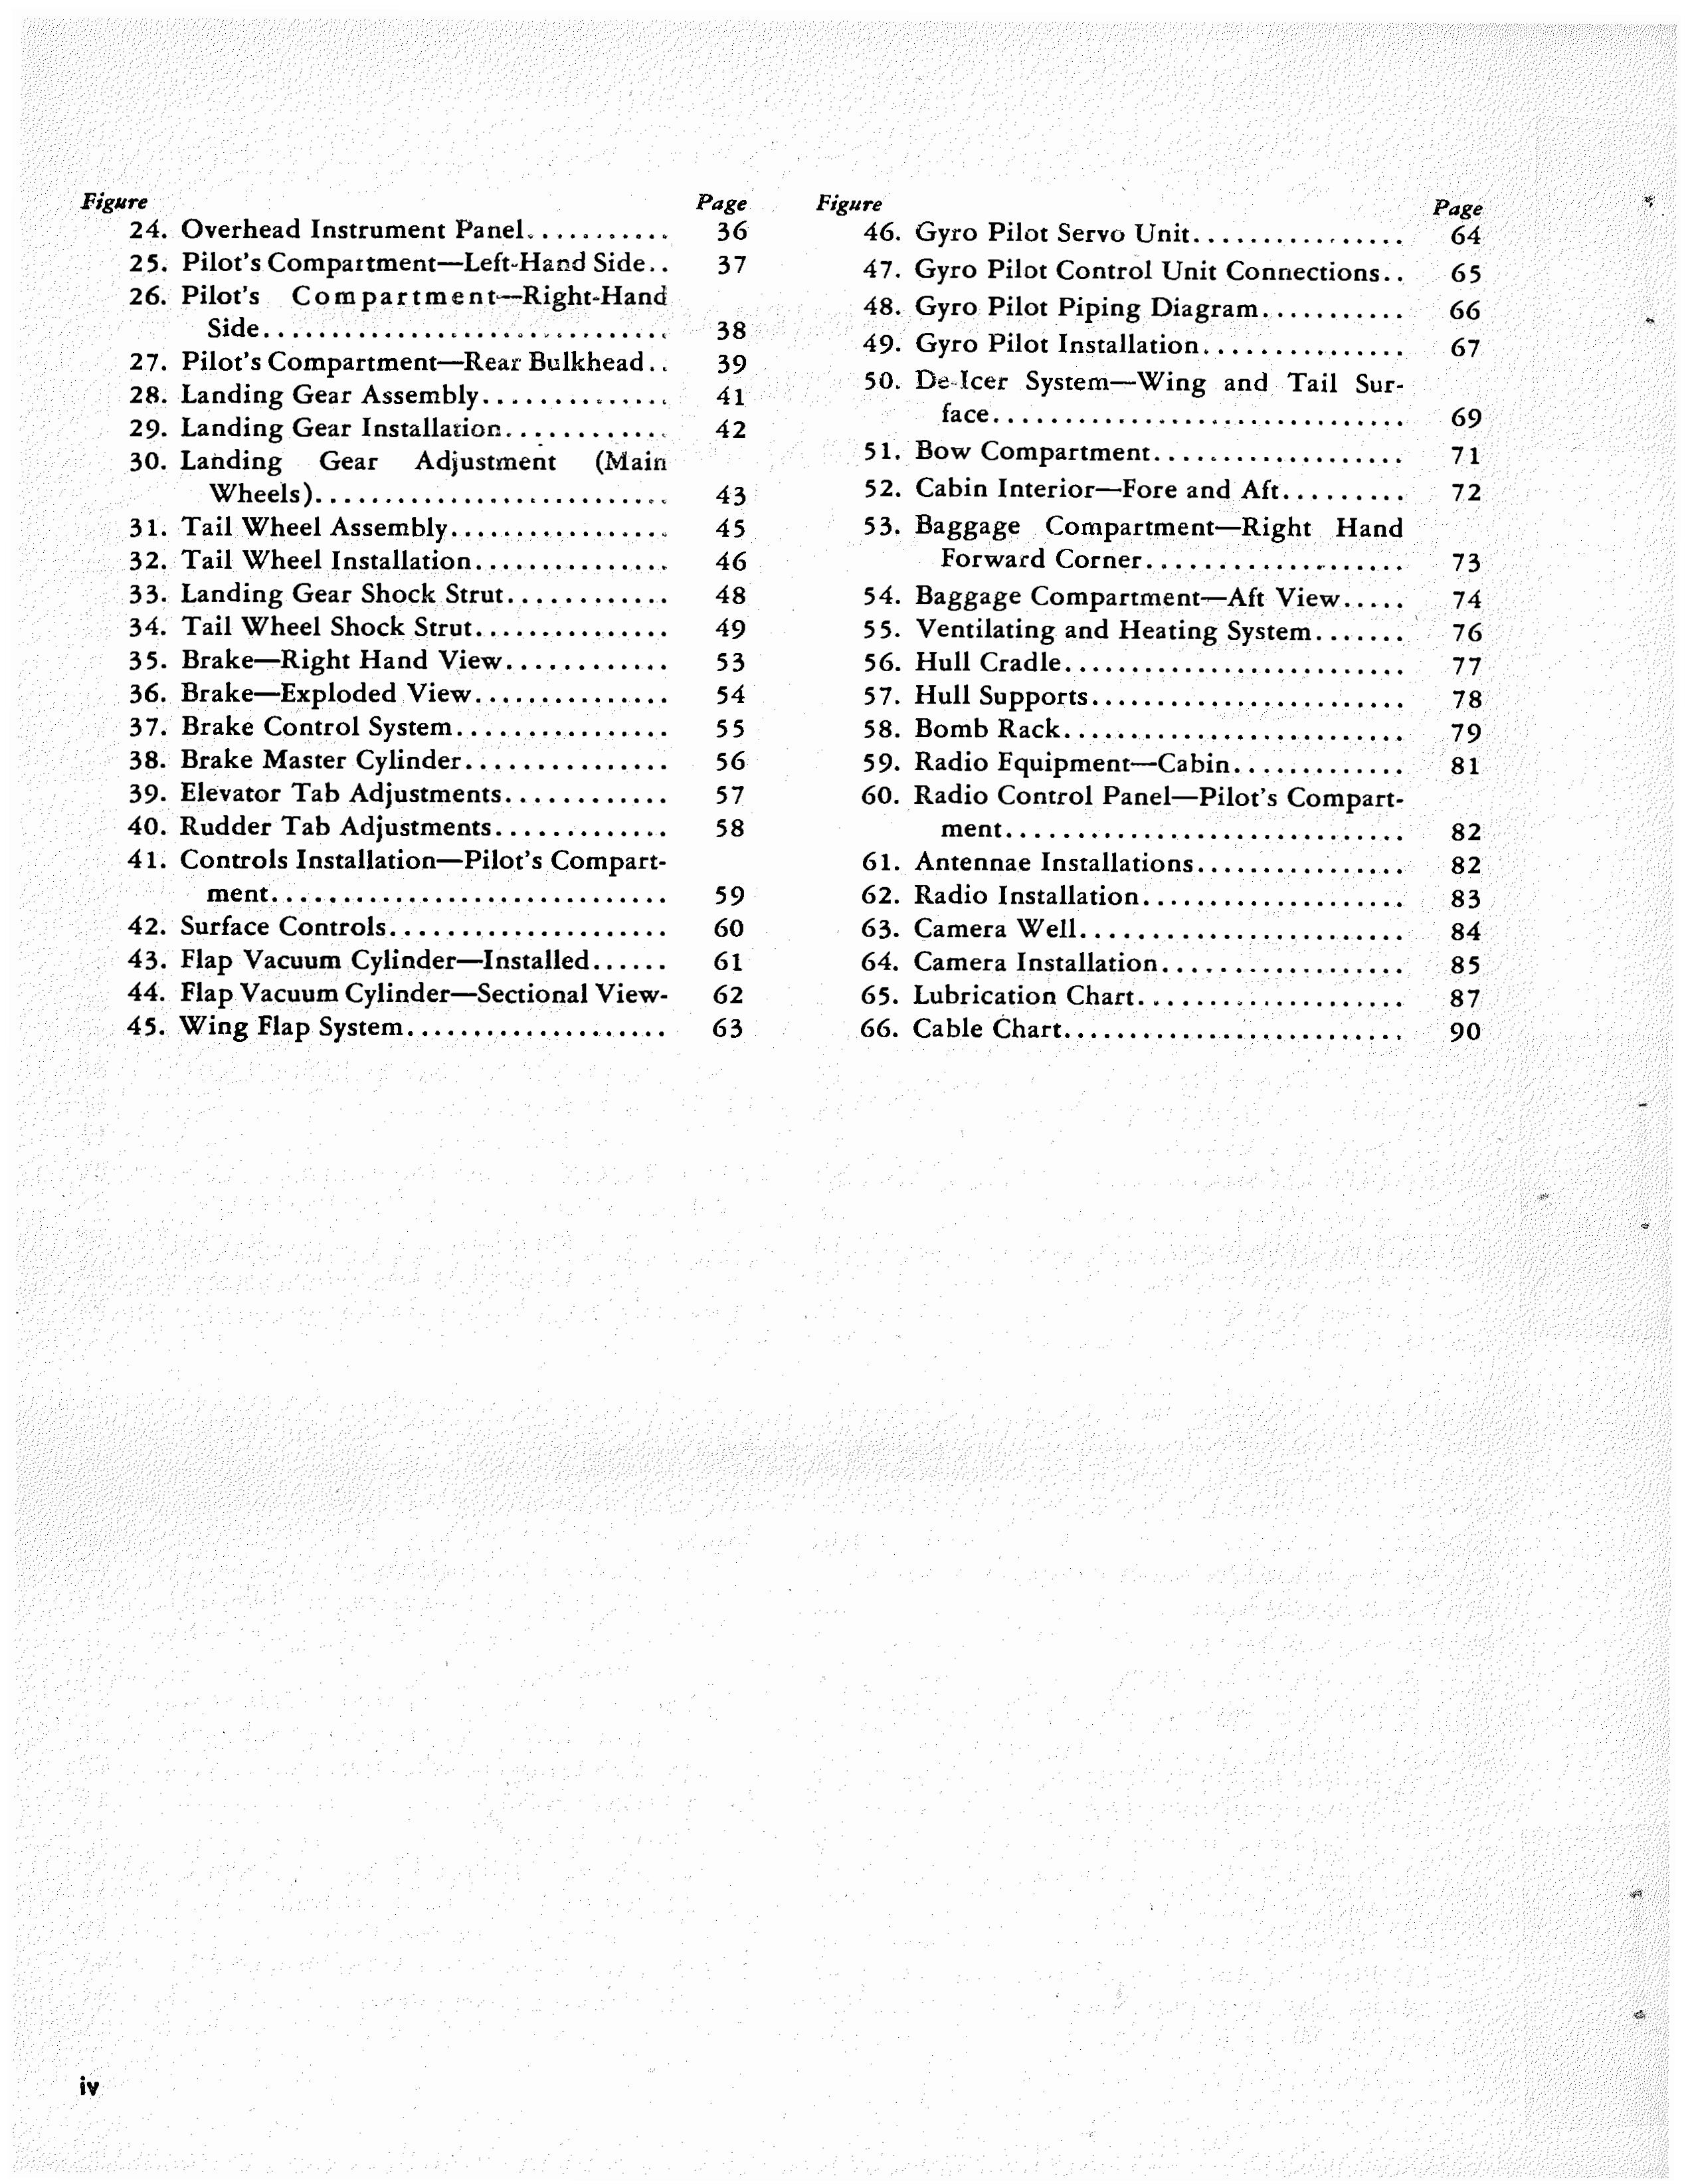 Sample page 6 from AirCorps Library document: Service Manual for Grumman Goose Model G-21A (JRF)